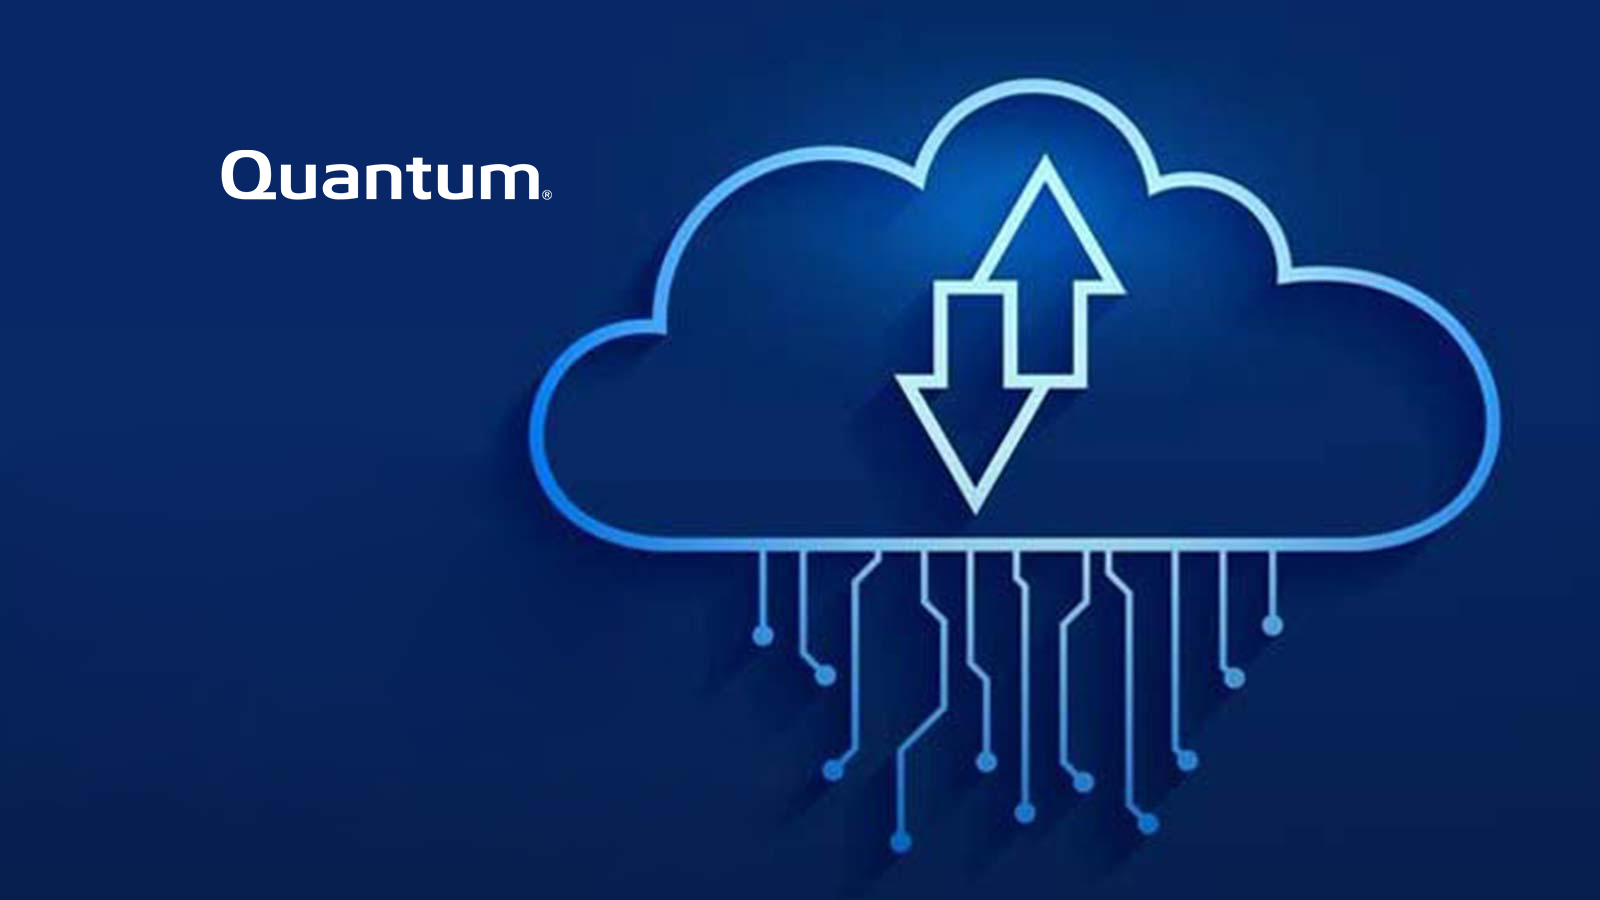 Quantum Expands Hybrid Cloud Leadership with New Features across End-to-End Unstructured Data Platform